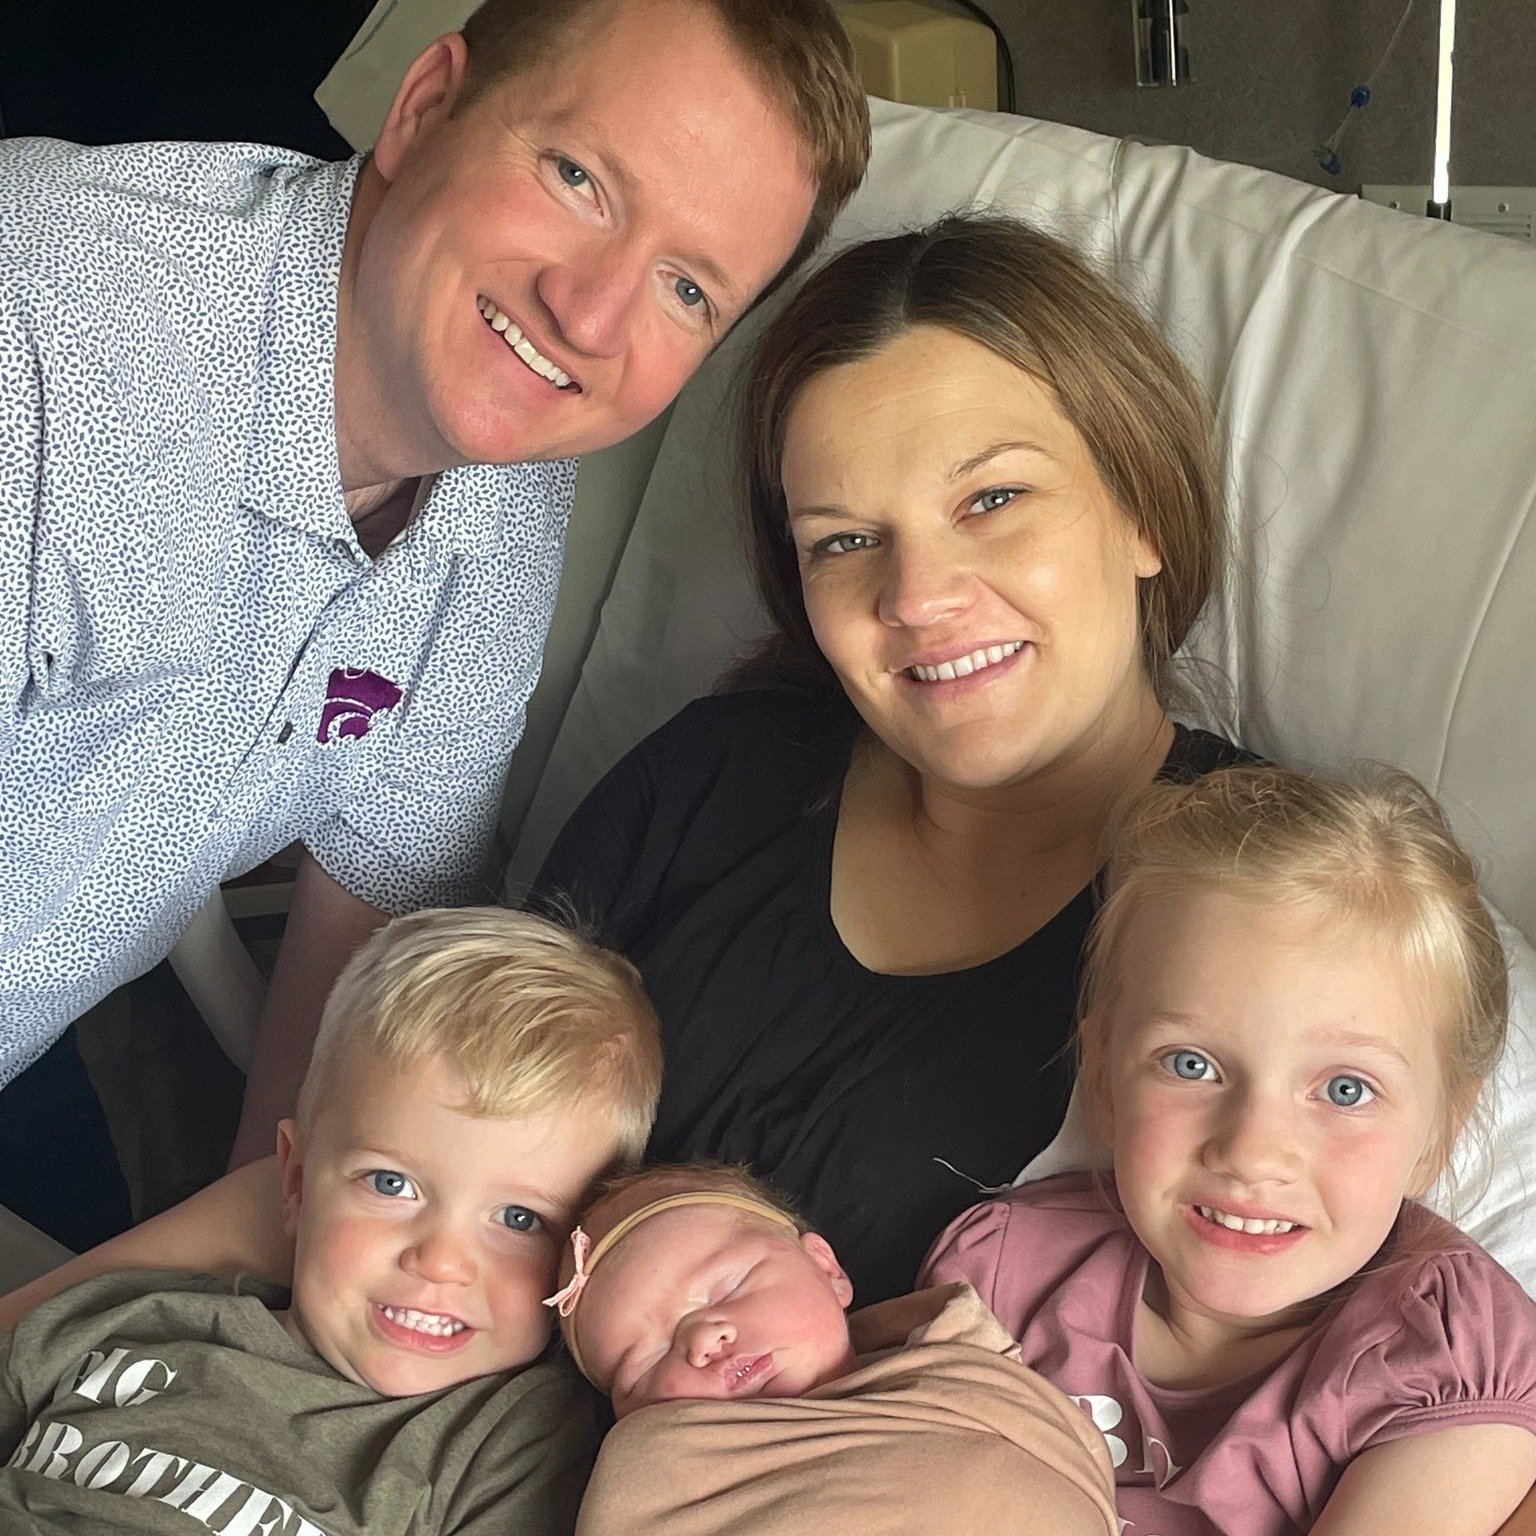 Please join us in congratulating Dr. Olson, Rachelle, and their family on their newest addition! Welcome to the world, Maris Faye Olson!